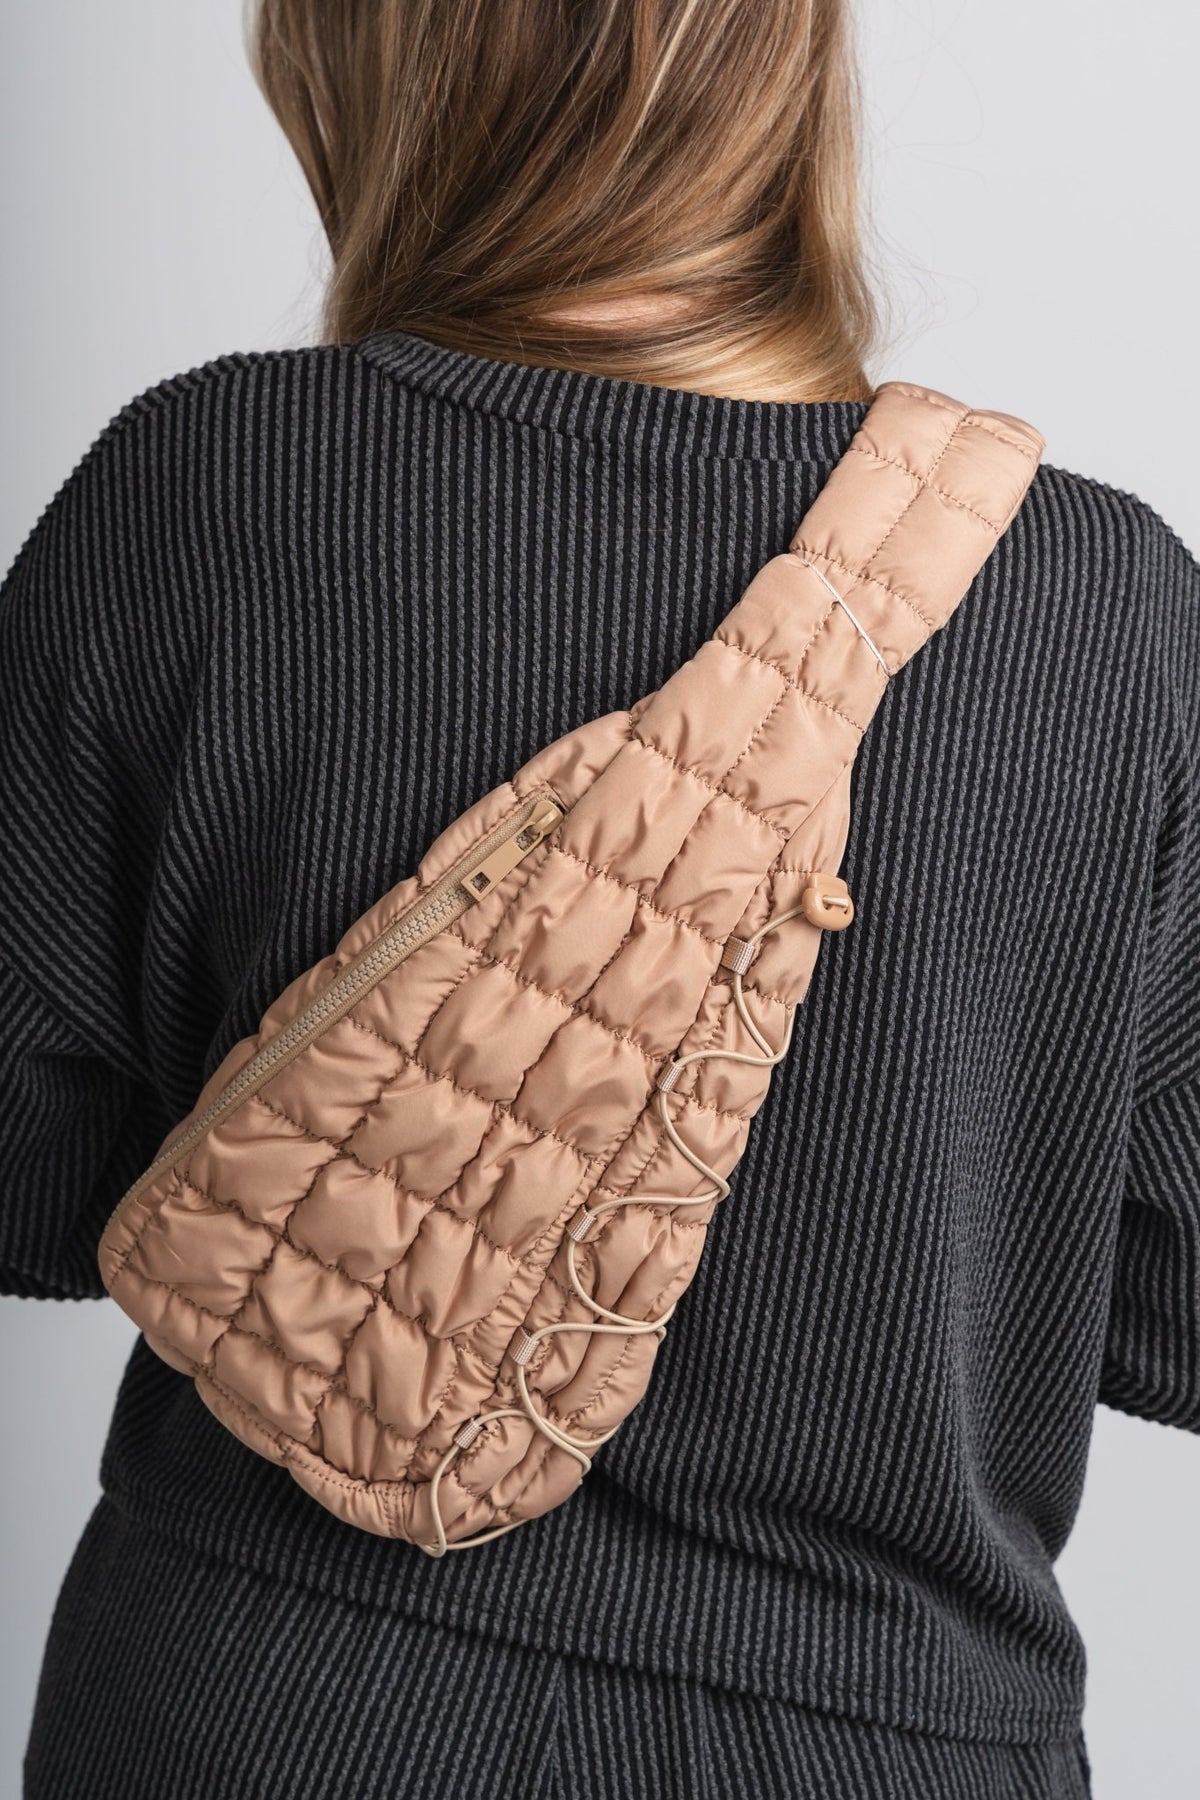 Quilted sling bag tan - Trendy Bags at Lush Fashion Lounge Boutique in Oklahoma City